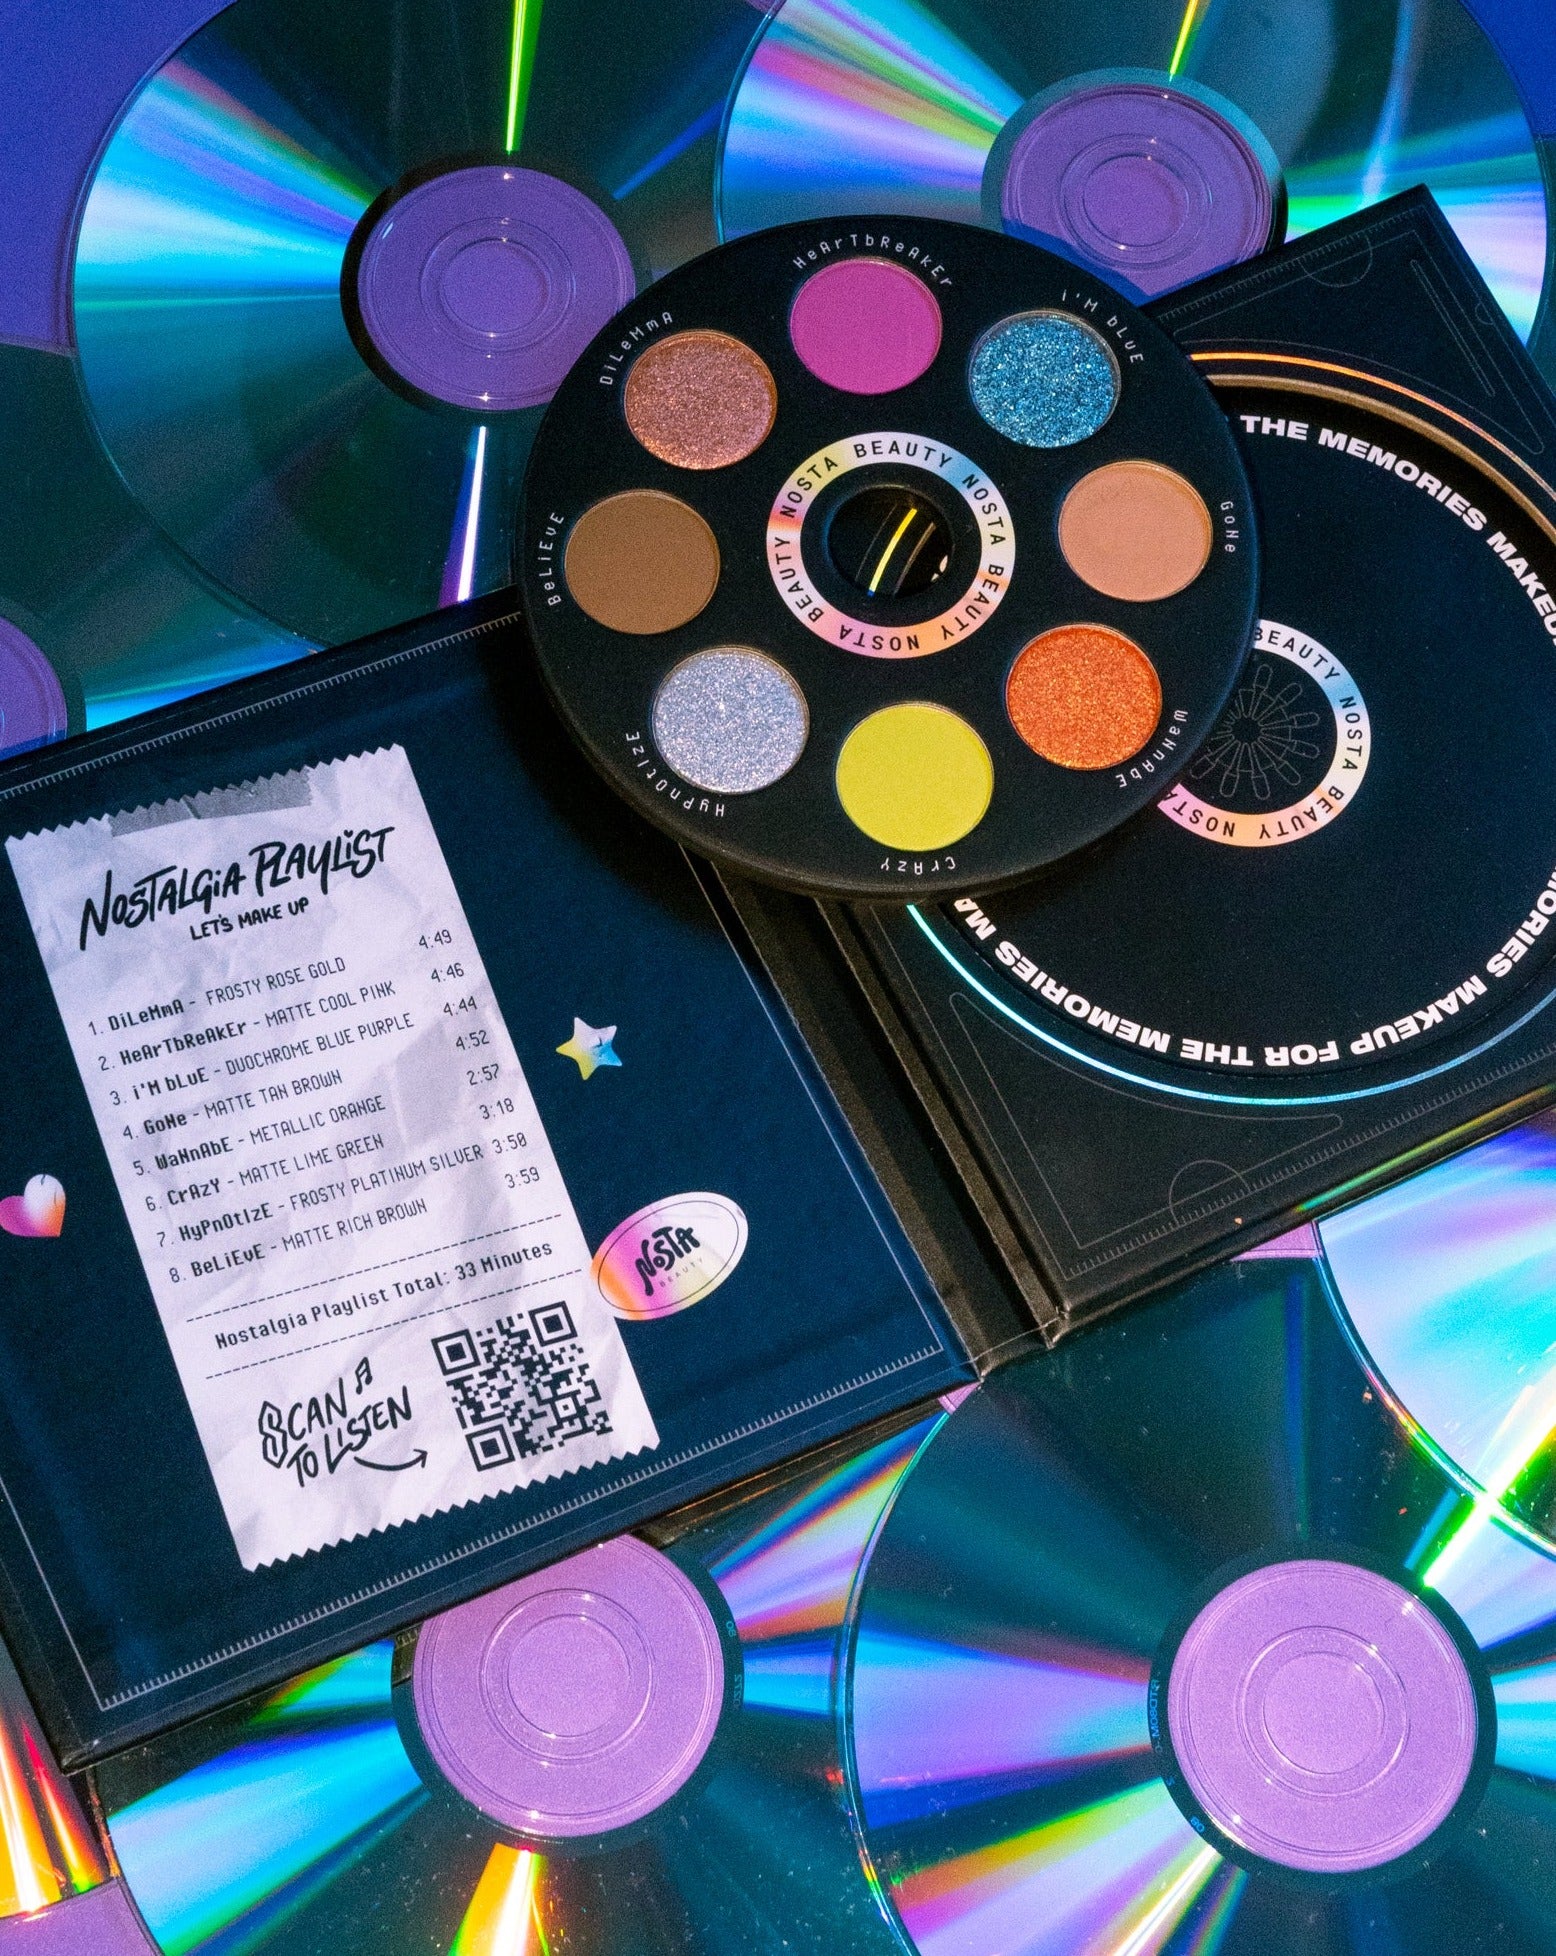 Adorably packaged CD case eyeshadow palette with 8 nostalgic hit songs from the 90s & 2000s listed on left as inspiration for shades.